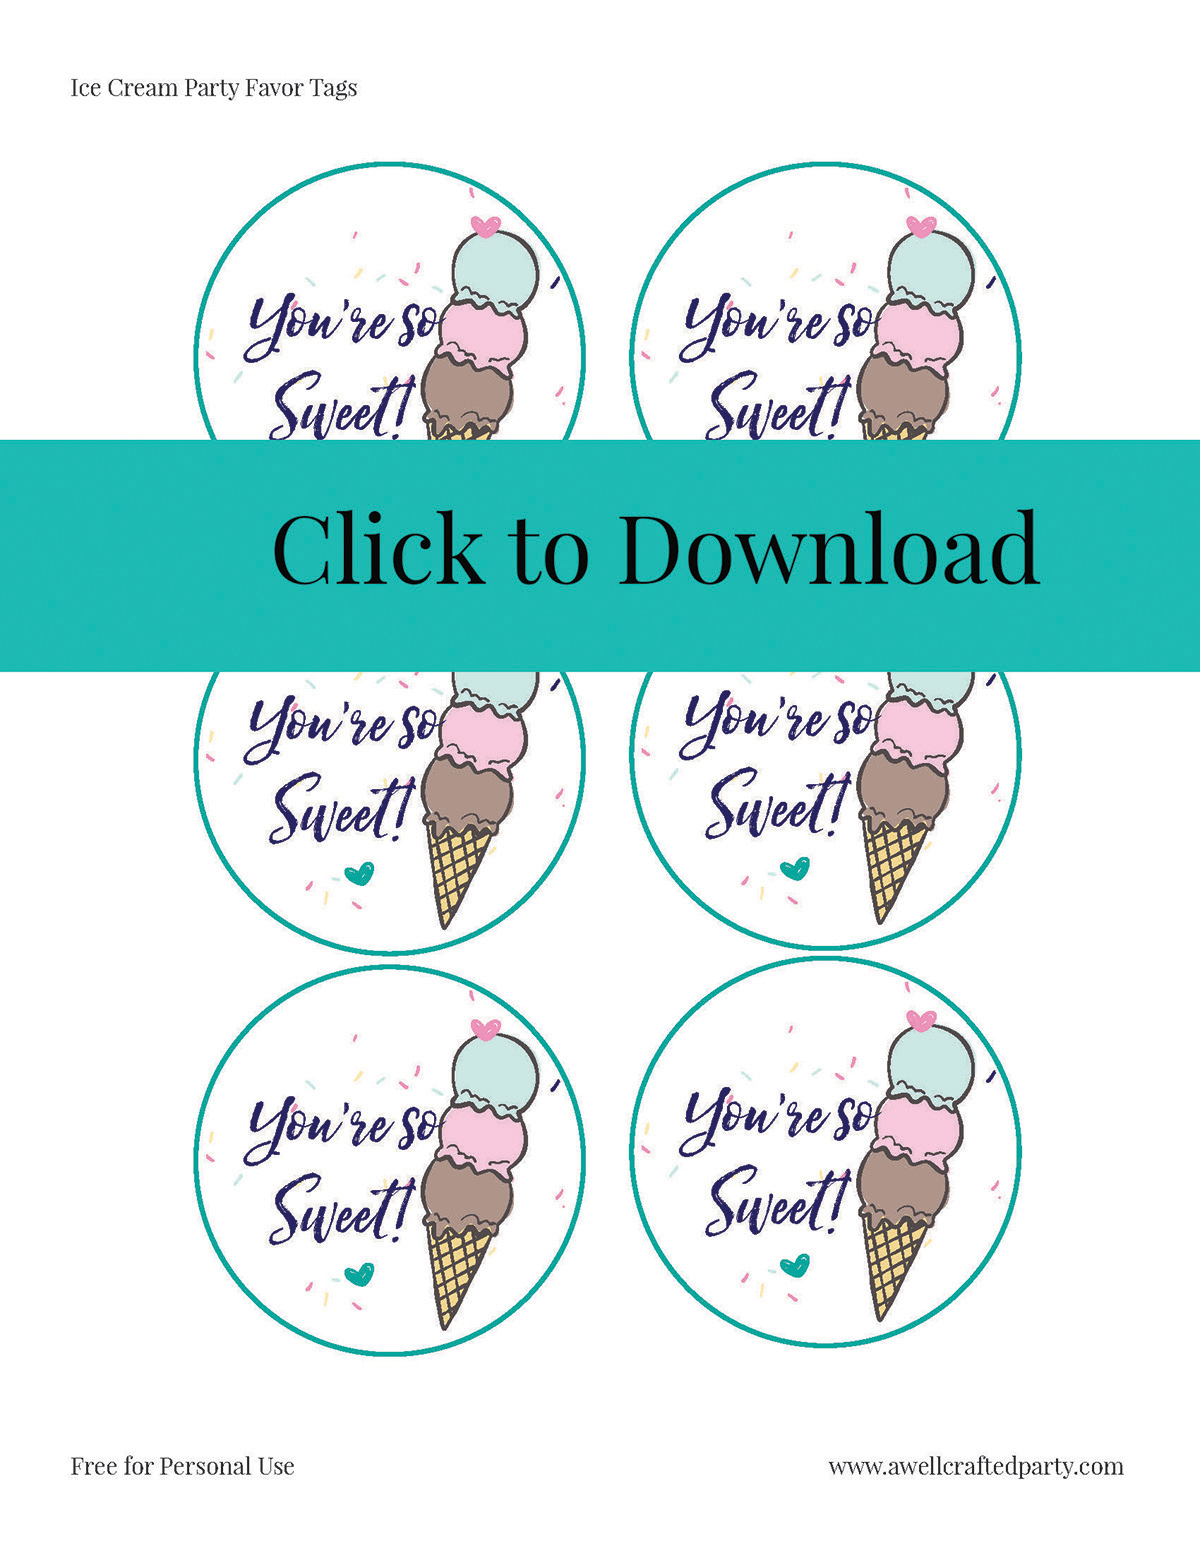 Ice Cream Party Free Printables | A Well Crafted Party